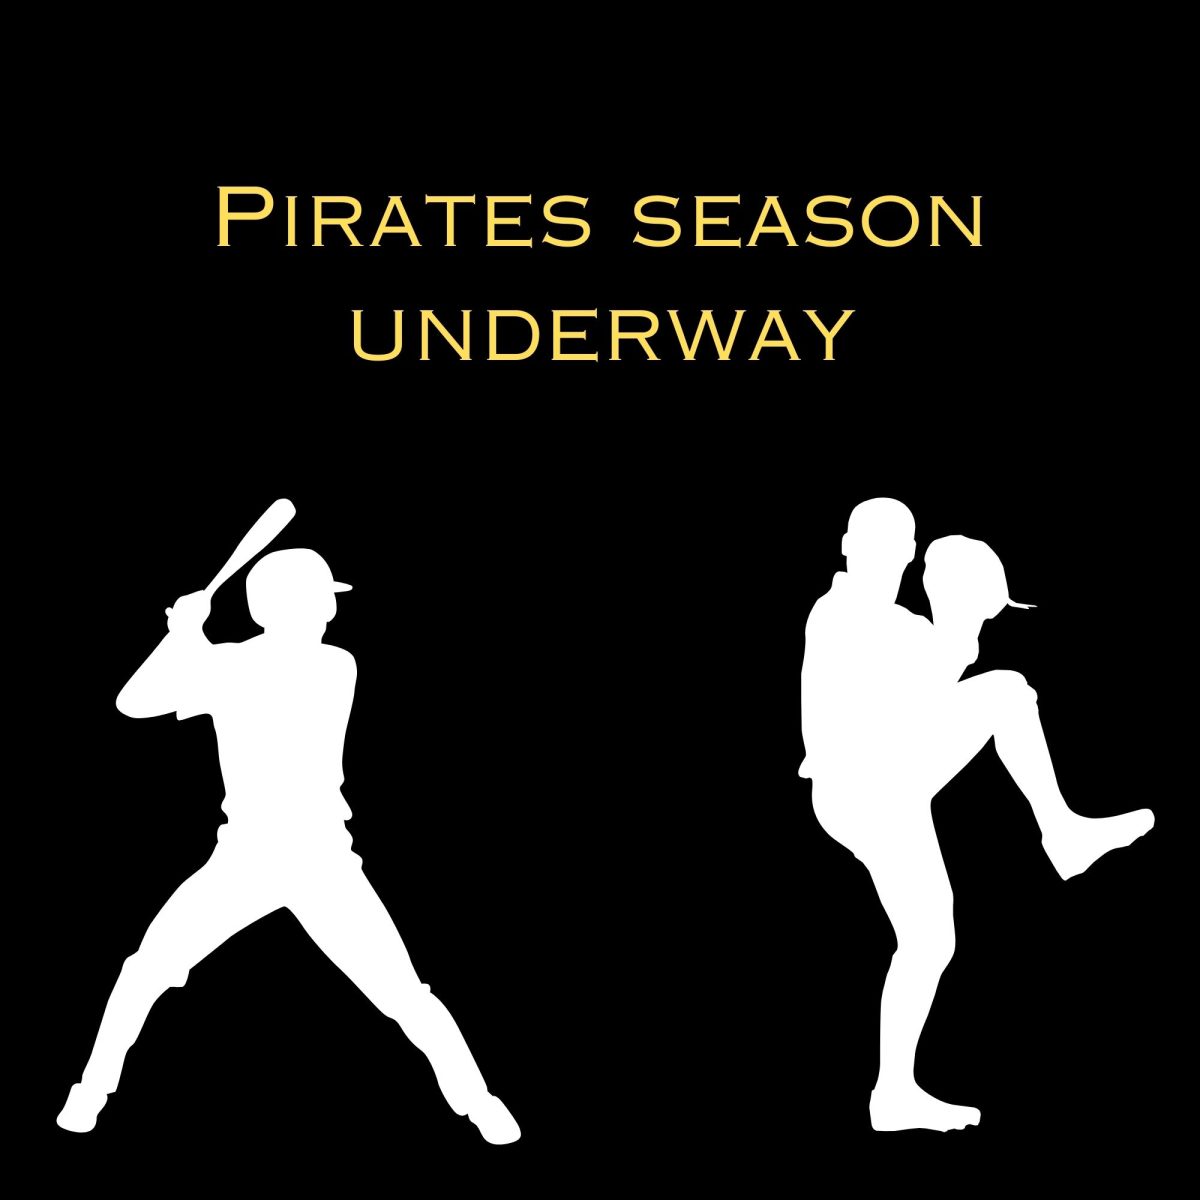 Lets+go+Bucs%21+The+Pirates+2024+season+started+on+March+28+with+a+game+against+the+Marlins.+%5BMade+with+Canva%5D